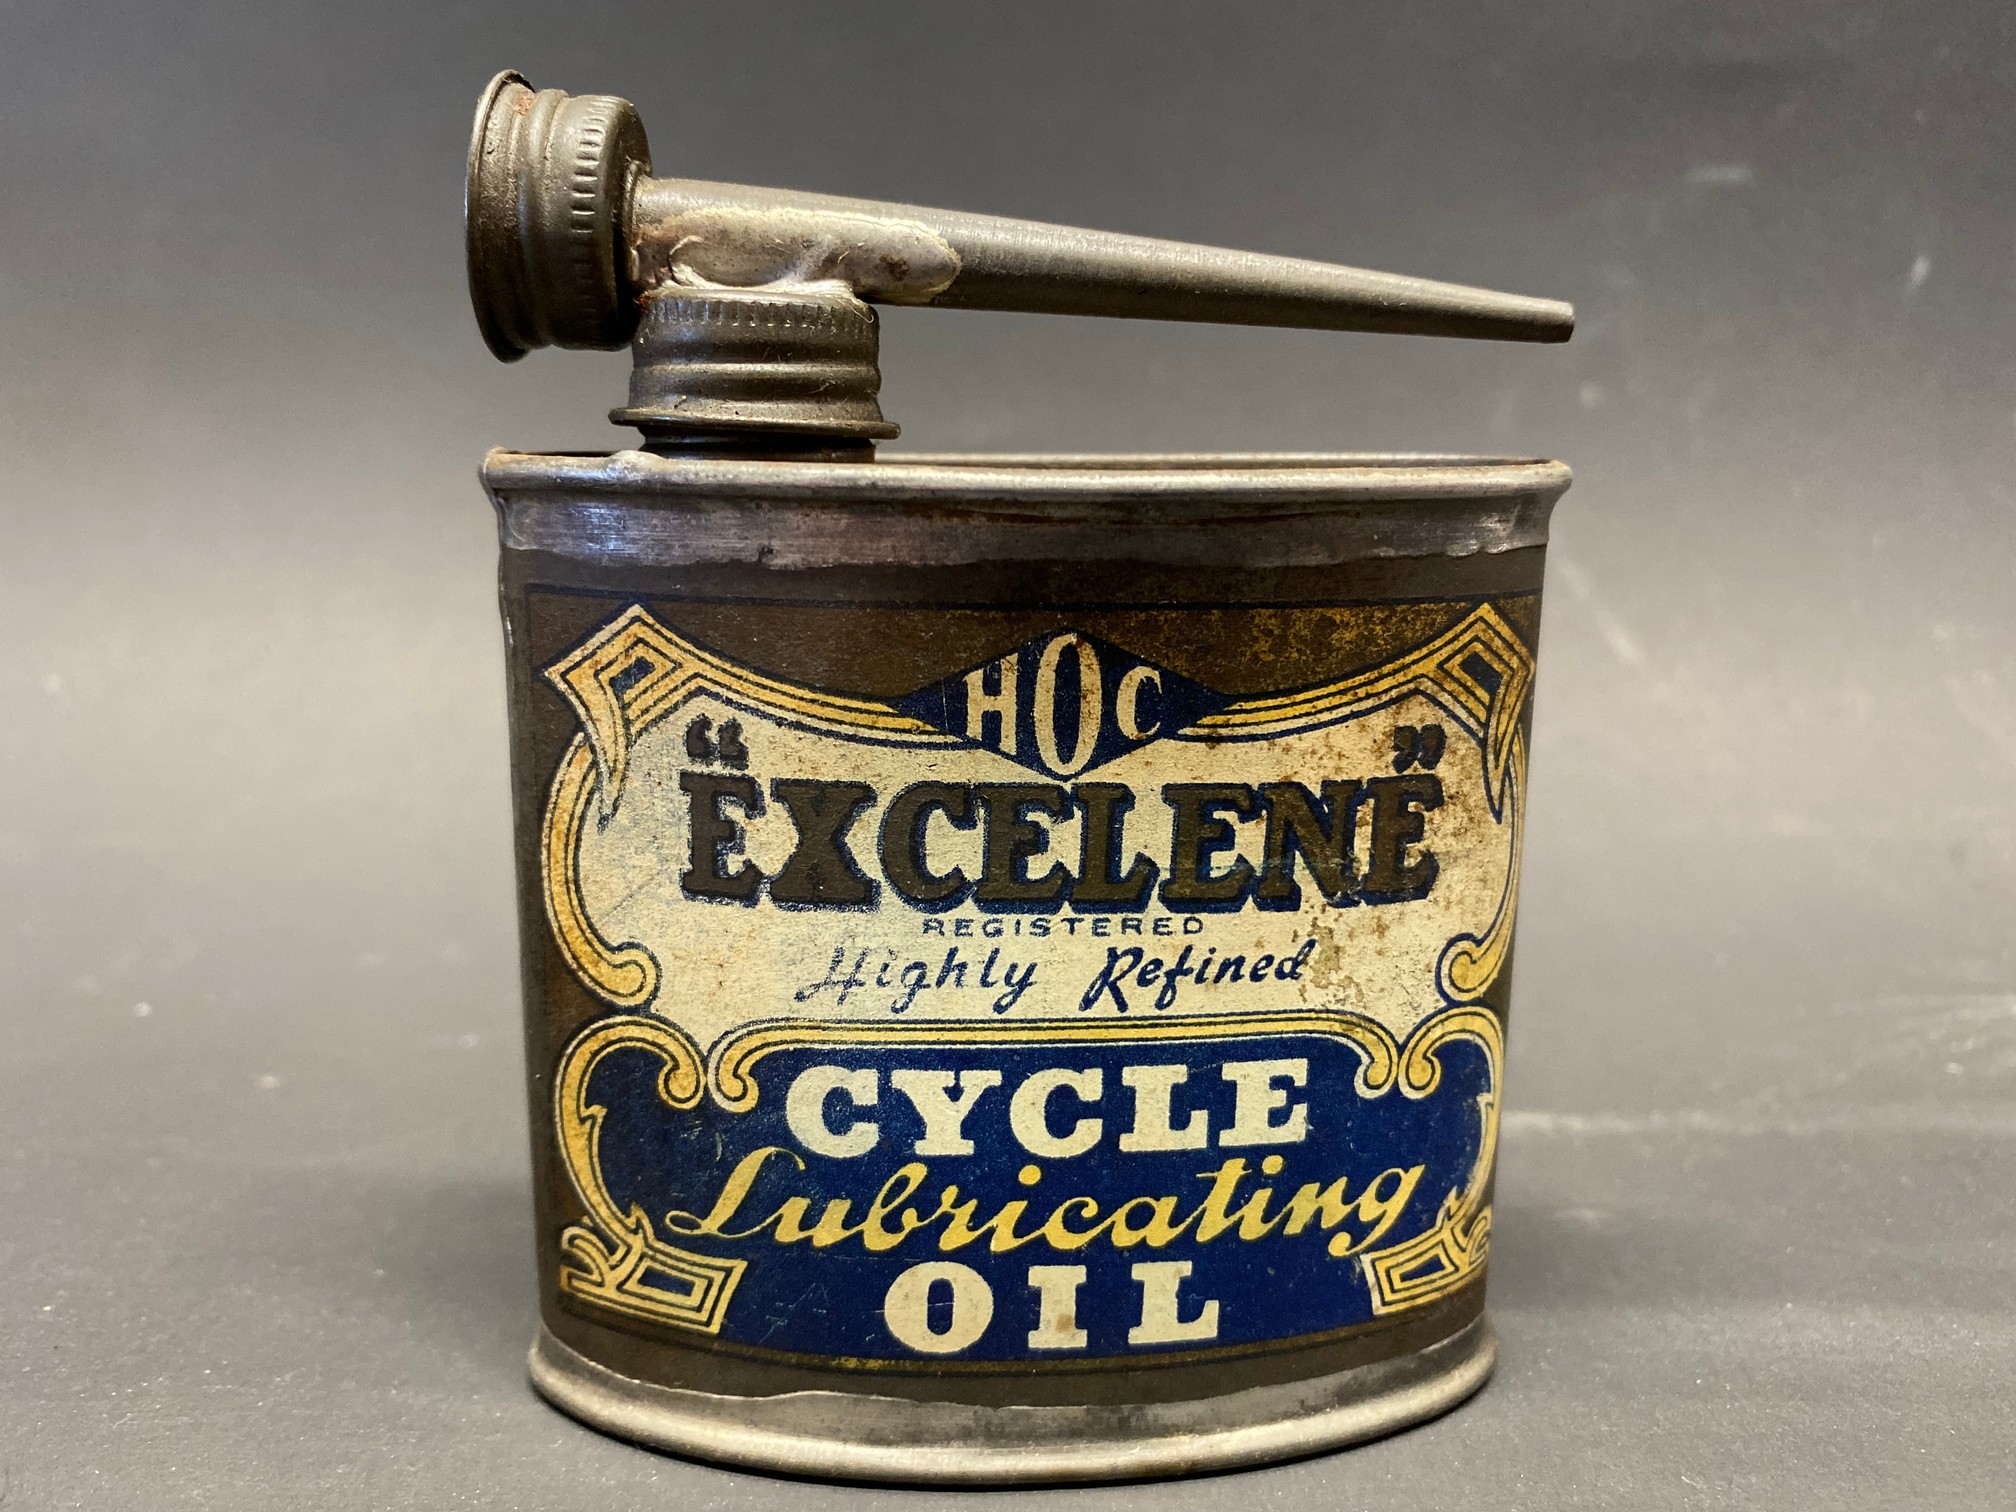 A small Excelene Cycle Lubricating oil can, in good condition.